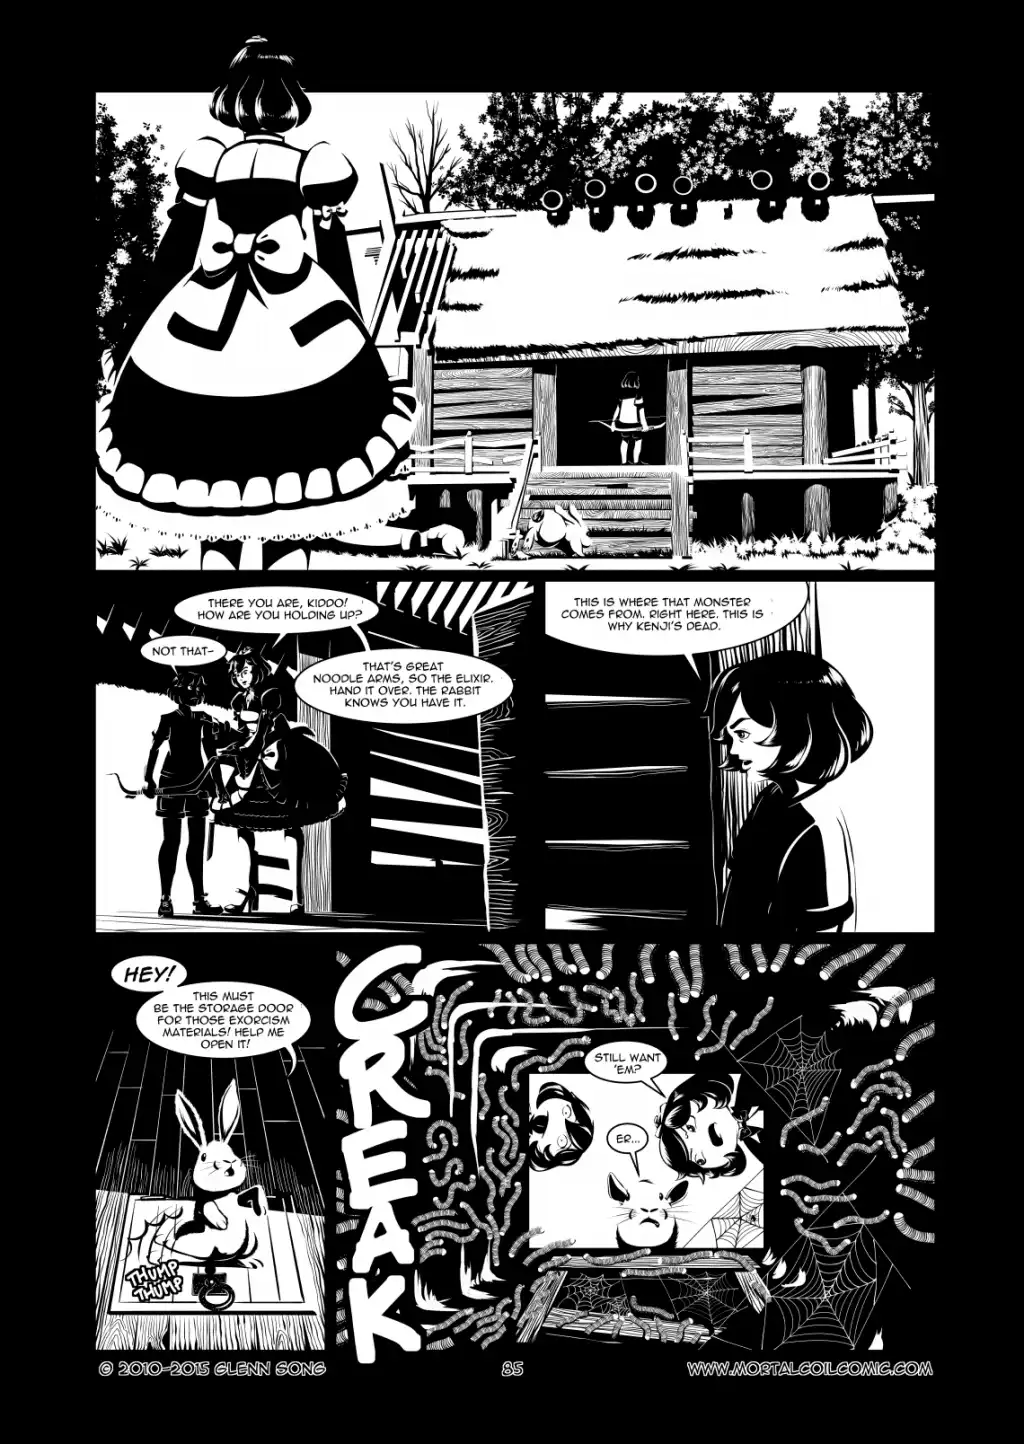 A Voice in the Woods, Page 2